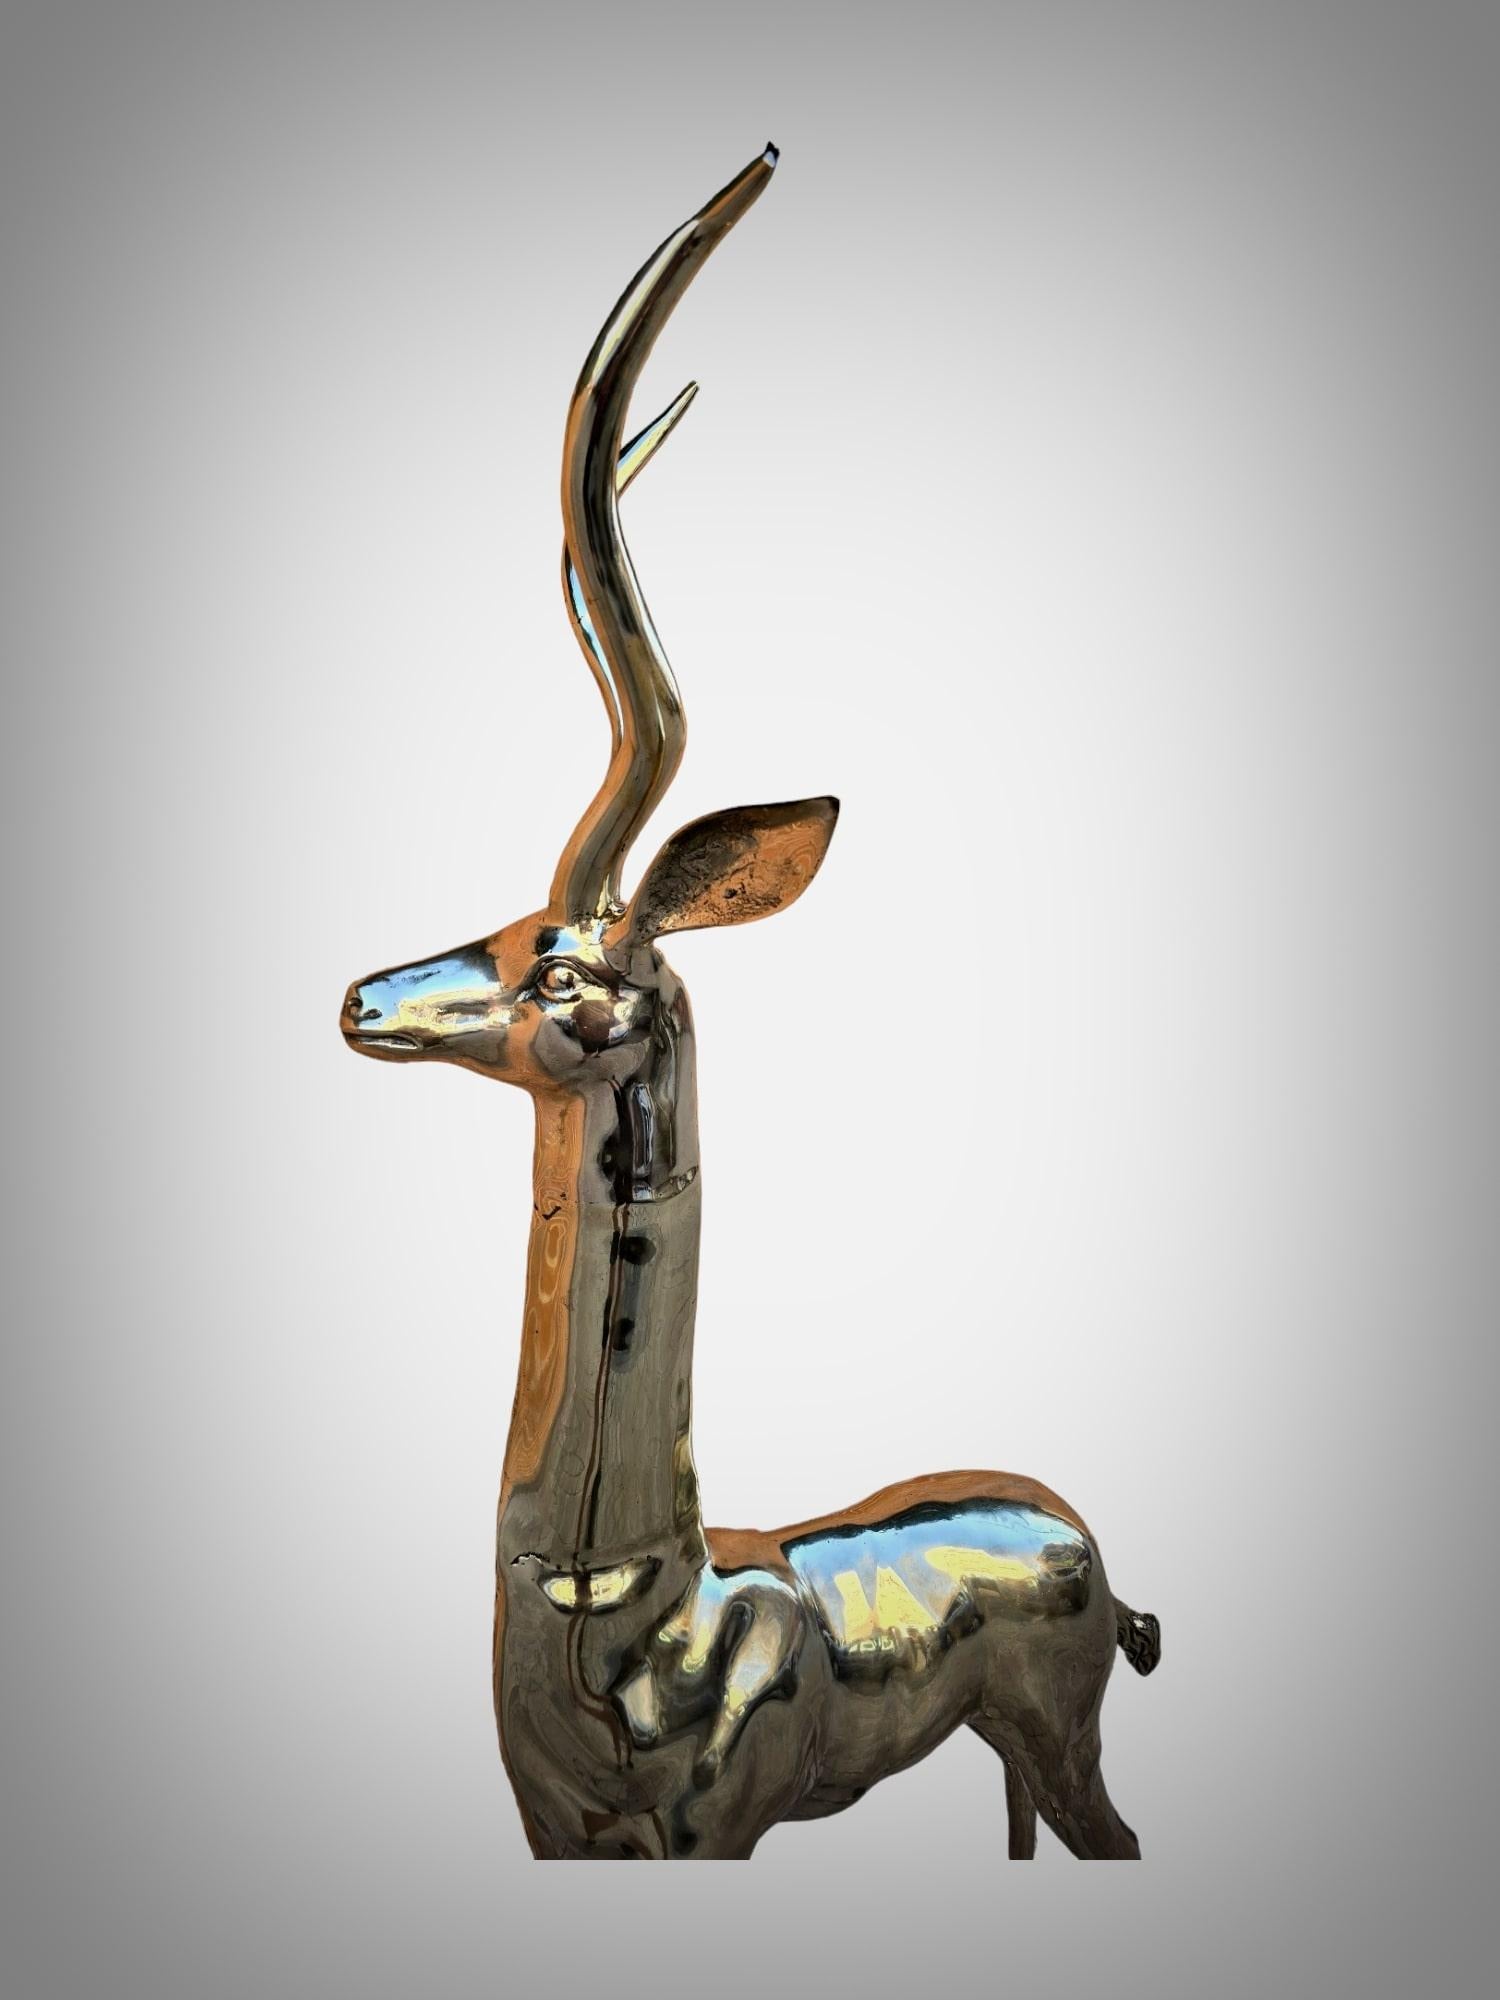 Exquisite Polished Bronze Sculpture: Lifesize Antelope from the 1950s For Sale 2